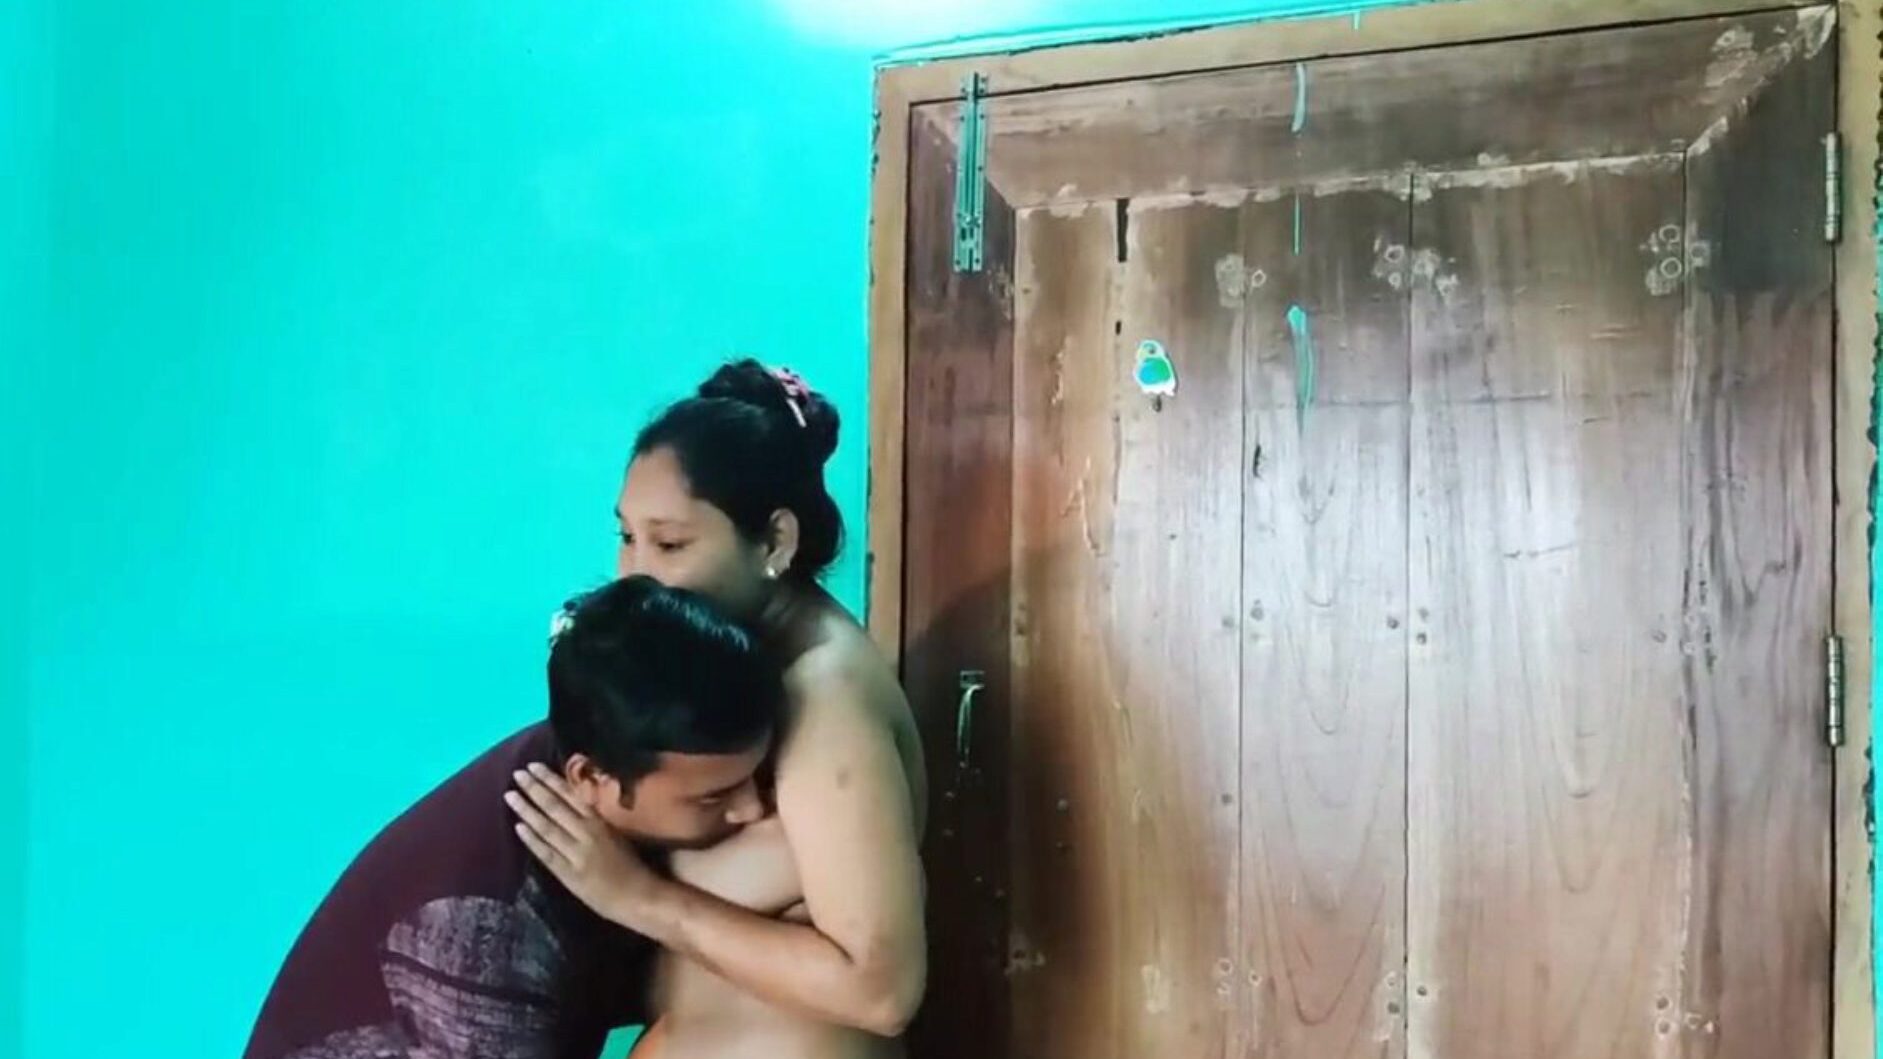 Desi bengali sex video naked ، free asian porn 6c: xhamster watch desi bengali sex video naked episode on xhamster ، the fattest hd fuck-fest tube web Resource with a ton of free-for-all asian xxn sex & anal pornography vids